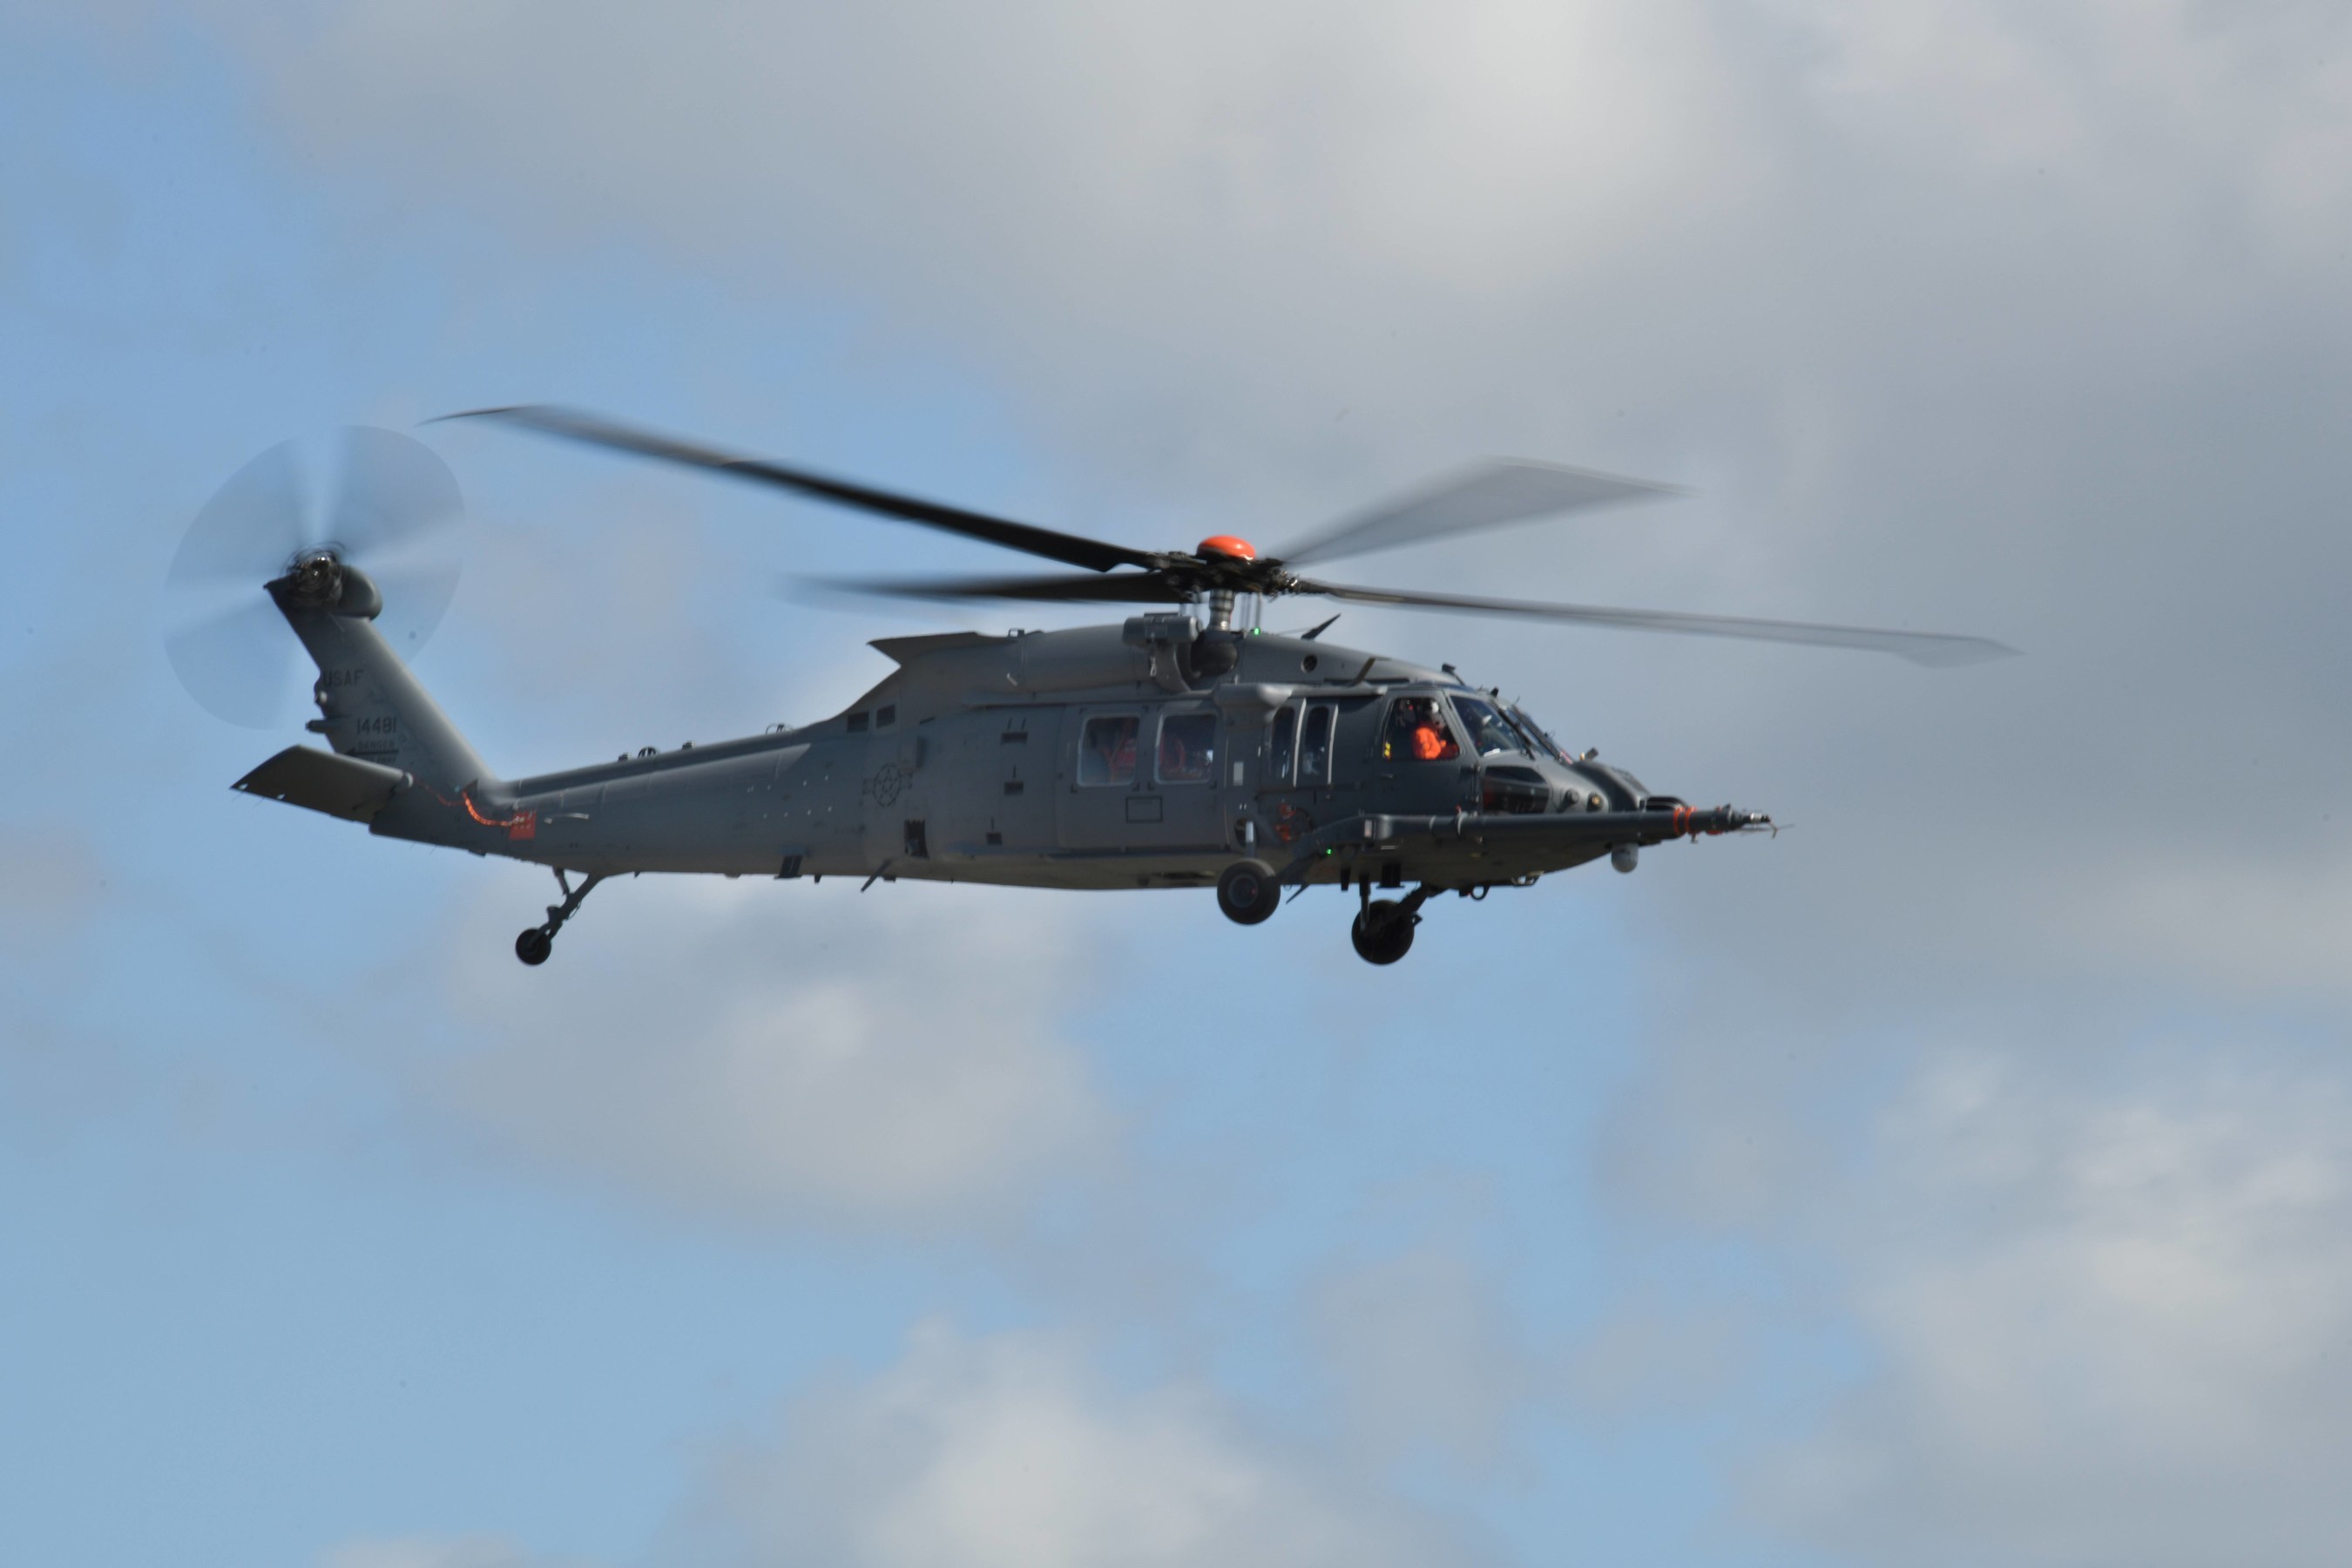 Sikorsky HH-60W helicopter in flight